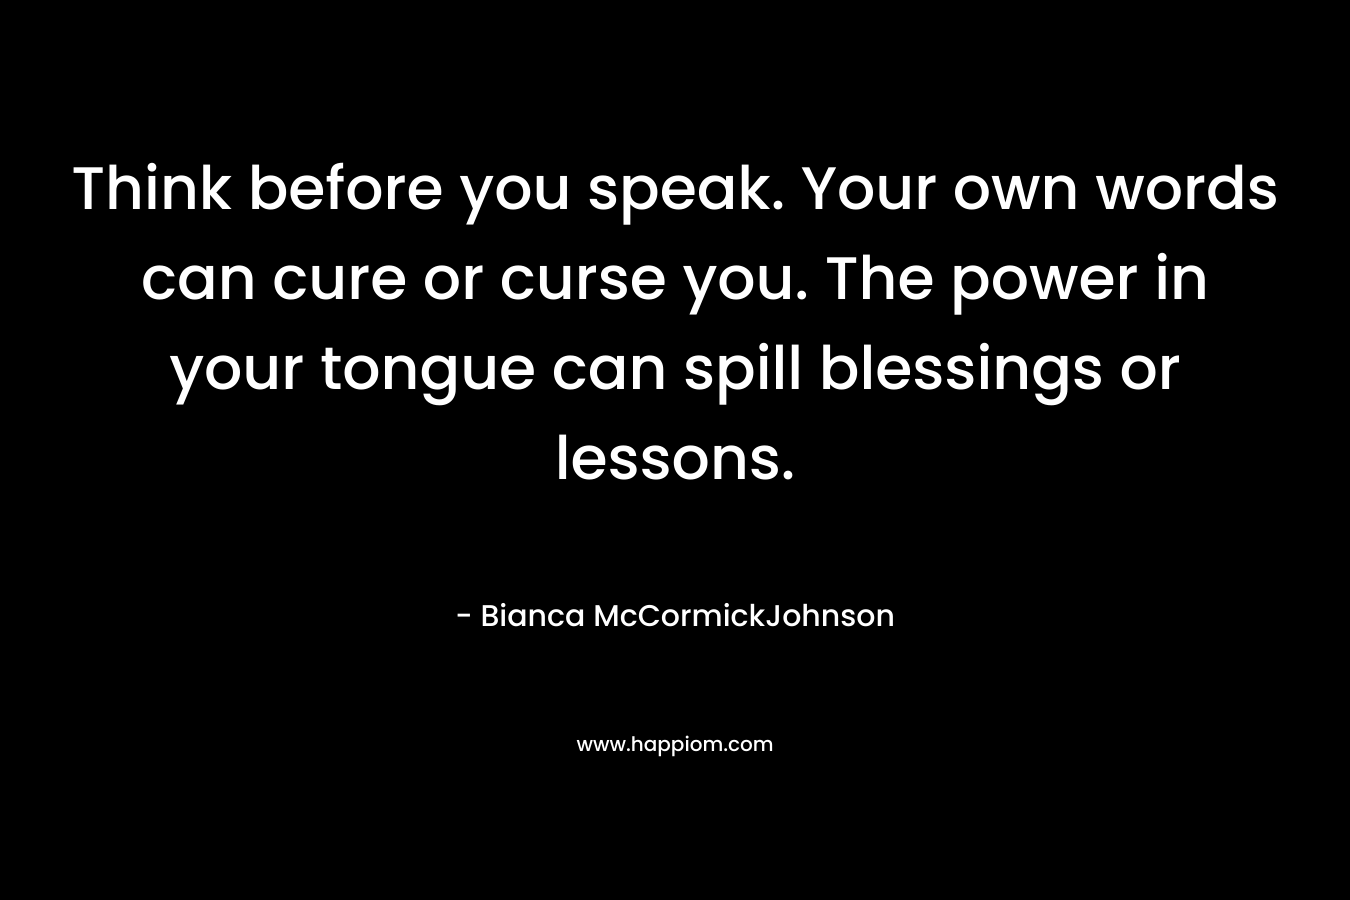 Think before you speak. Your own words can cure or curse you. The power in your tongue can spill blessings or lessons.